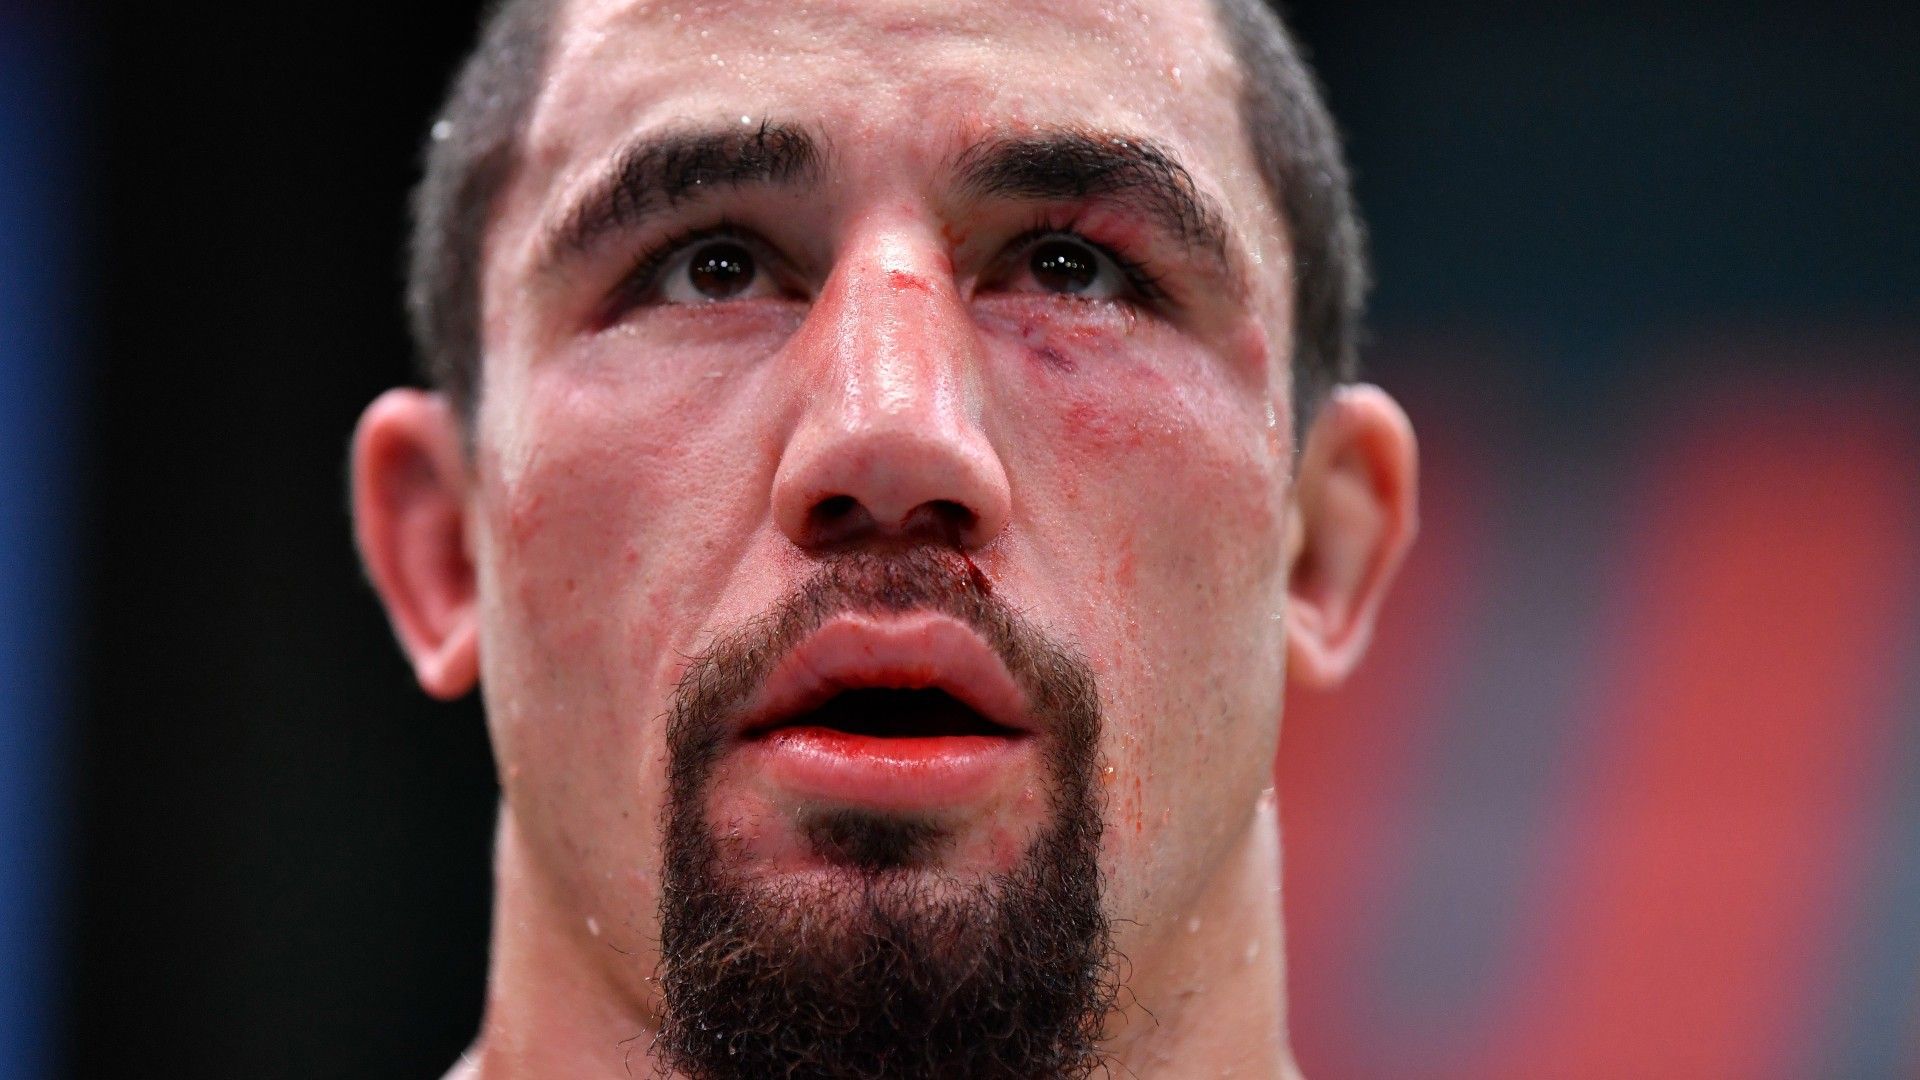 How Whittaker changed after shock UFC loss